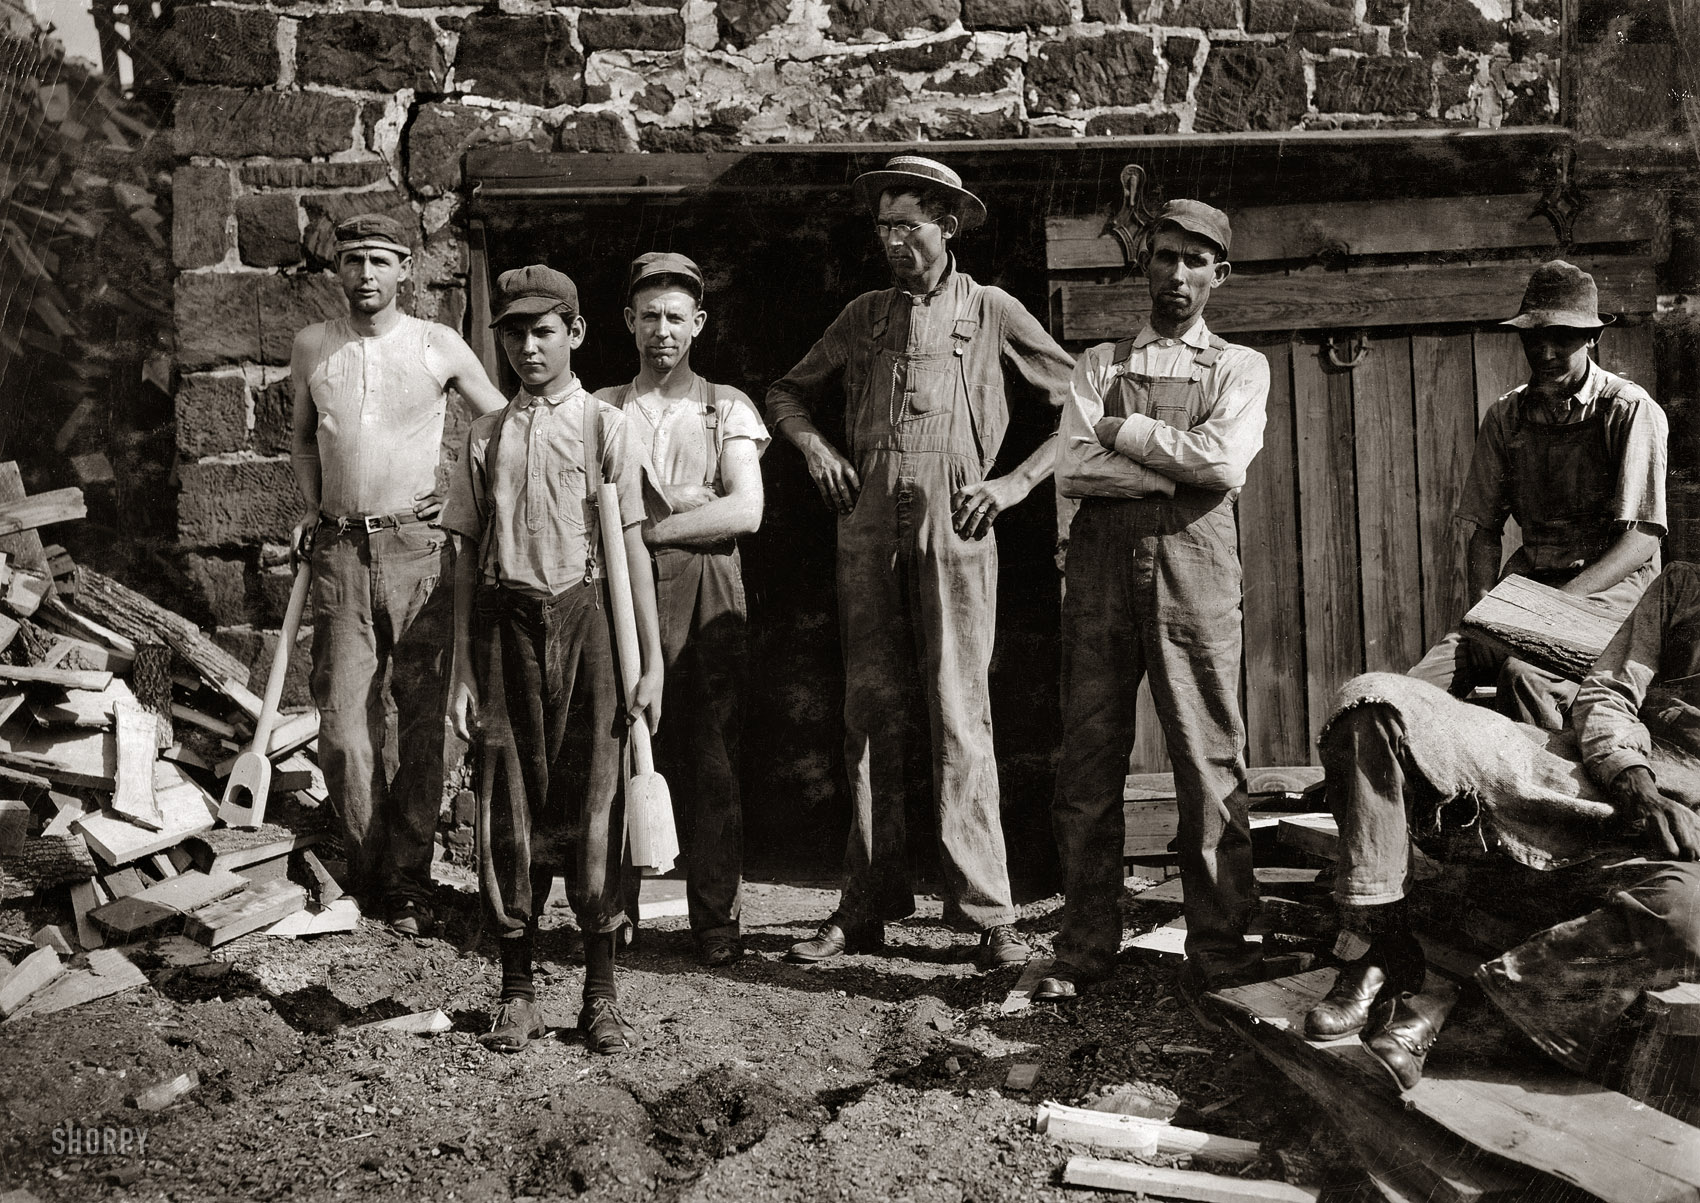 September 1913. Denison, Texas. "Group outside Pittman Handle Factory. A 15-year-old boy operating a dangerous boring machine at which he said a boy recently bored half his hand off. To operate this machine (which bores a large hole in the spade handle) the boy has to throw his whole weight onto the lever which pushes the handle (and himself) up against the unprotected borer. A slip might easily result fatally. Boy earns $1.65 a day. This factory has a number of unprotected belts and dangerous machines. One other boy, about the age of this one, was doing all kinds of work, taking away the handles from a huge rip saw, etc., and constantly exposed to danger." Photo by Lewis Wickes Hine. View full size.